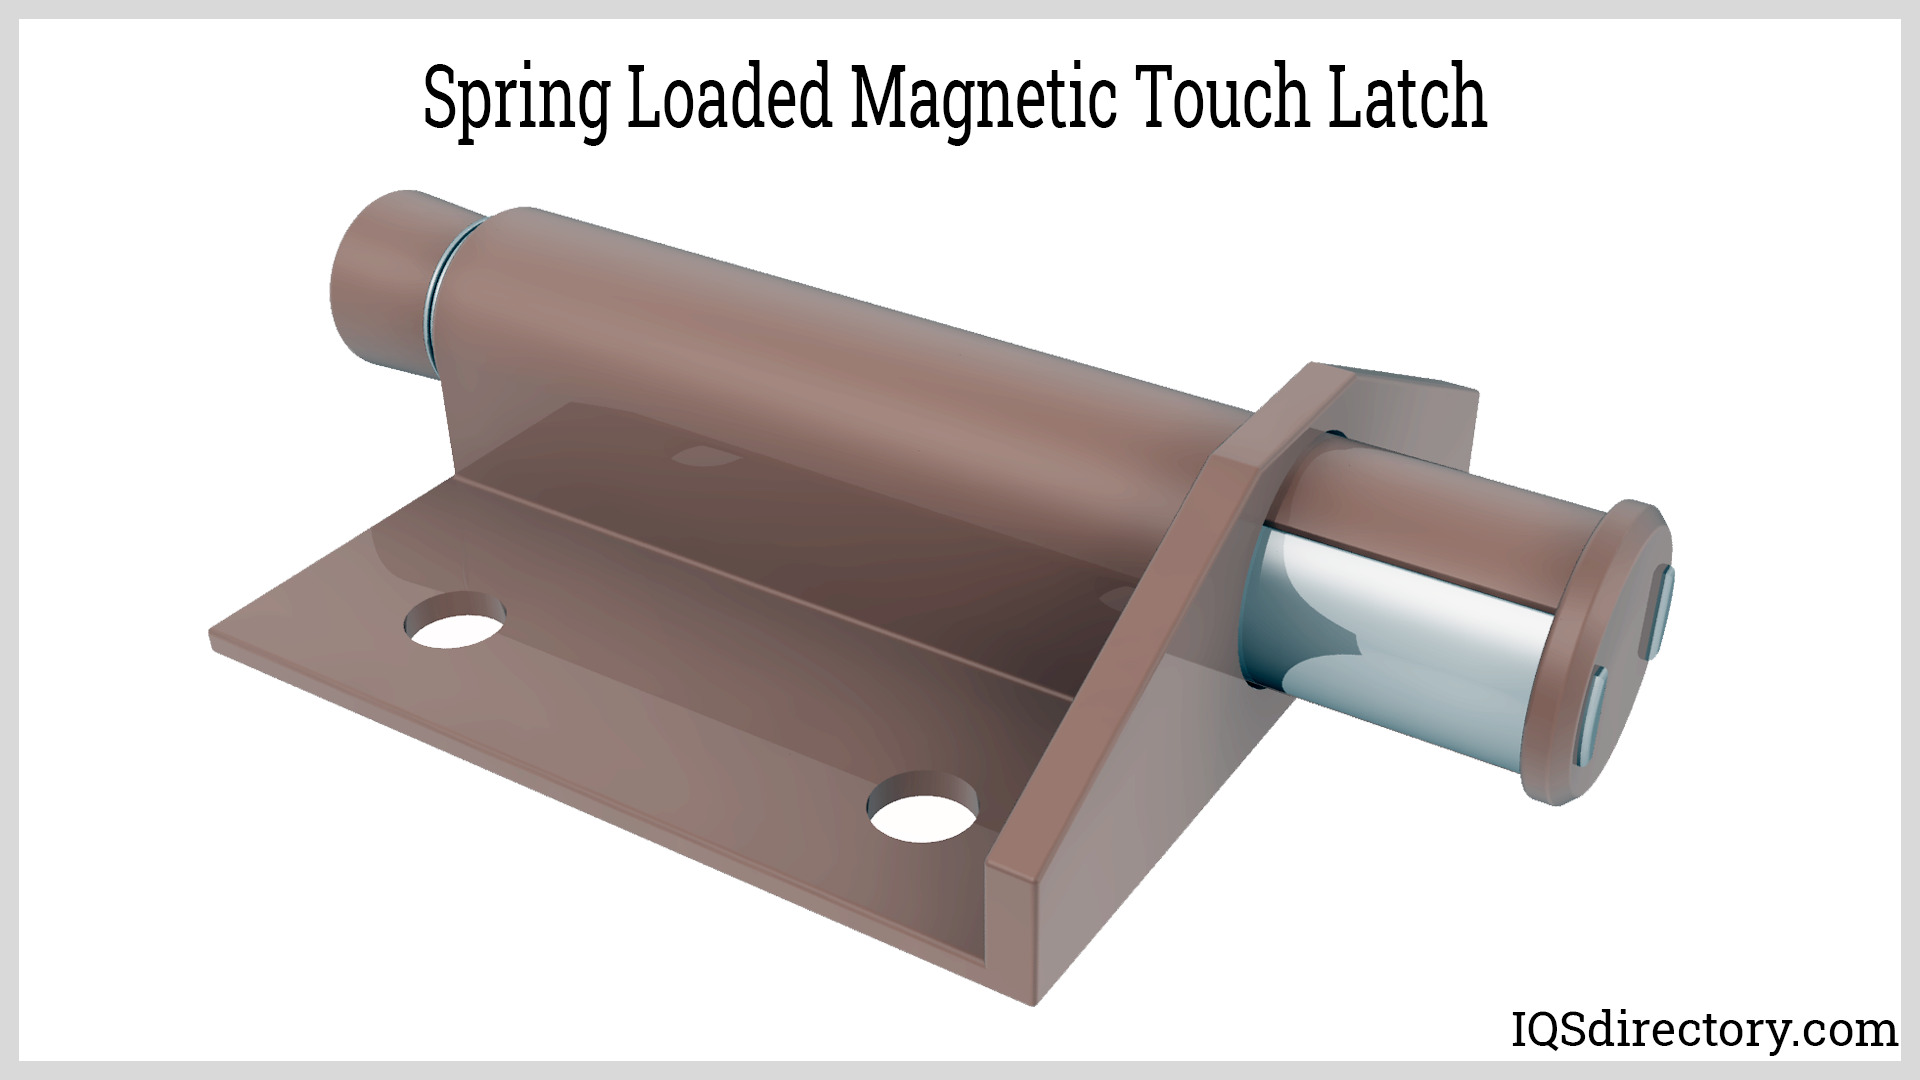 Spring Loaded Magnetic Touch Latch